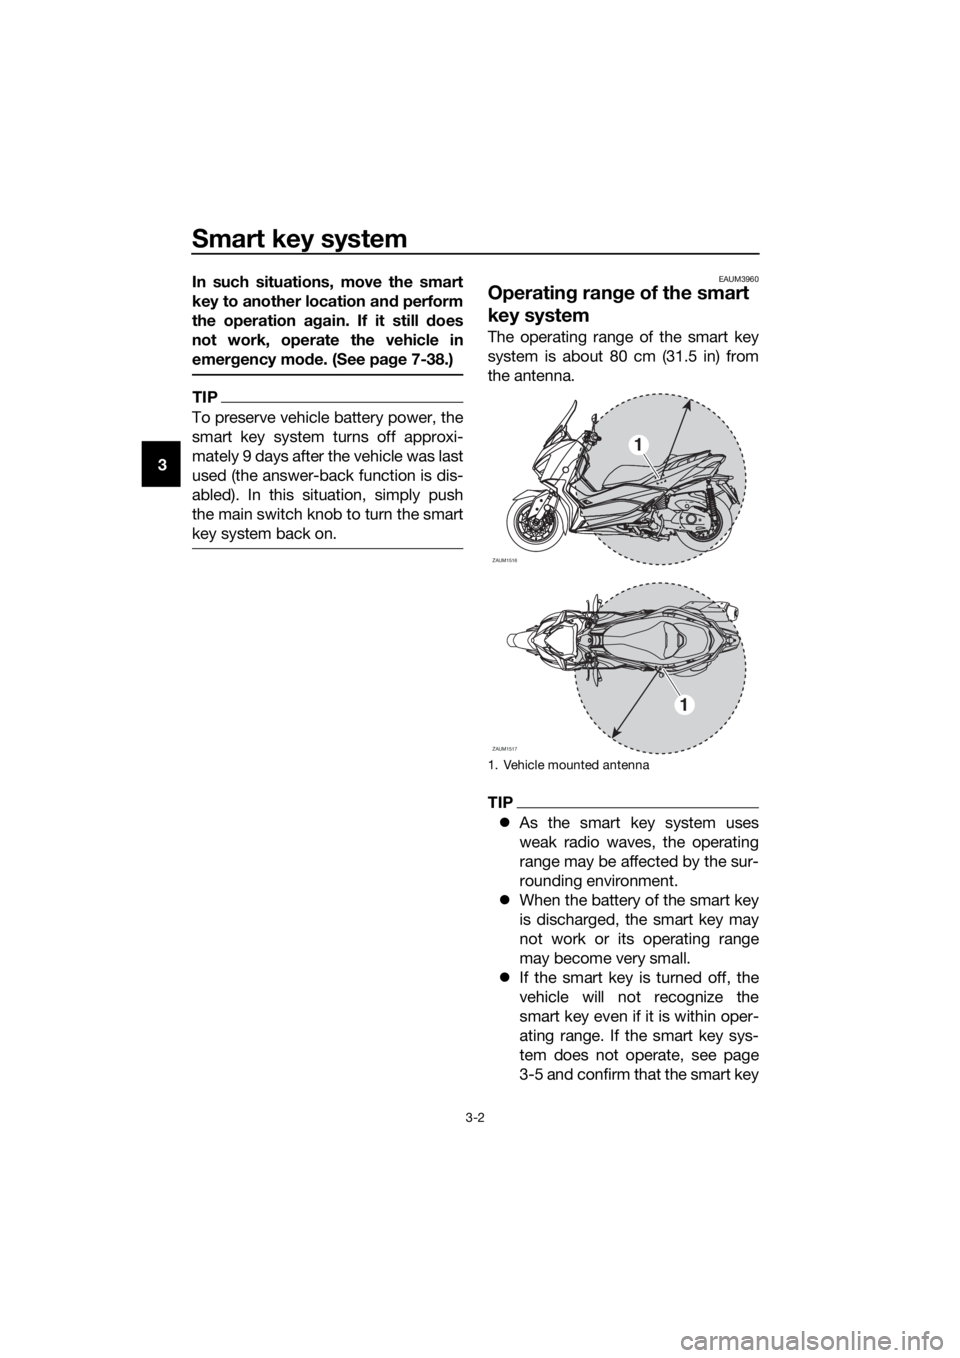 YAMAHA XMAX 300 2018  Owners Manual Smart key system
3-2
3In such situations, move the smart
key to another location and perform
the operation again. If it still does
not work, operate the vehicle in
emergency mode. (See page 7-38.)
TIP